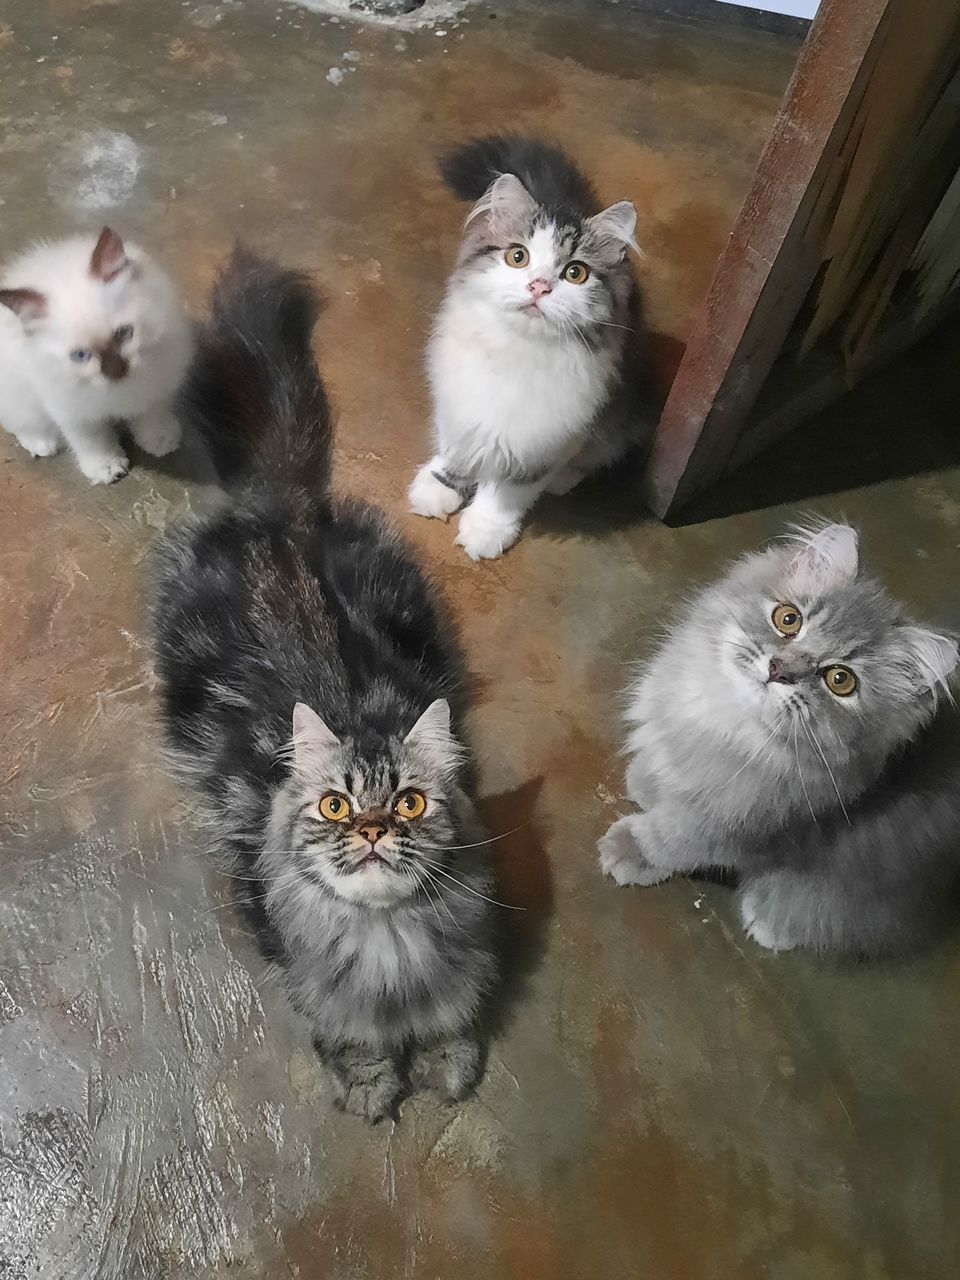 cat, animal, animal themes, pet, mammal, domestic animals, domestic cat, feline, group of animals, kitten, small to medium-sized cats, felidae, high angle view, no people, looking at camera, portrait, young animal, whiskers, indoors, domestic long-haired cat, carnivore, two animals, animal hair